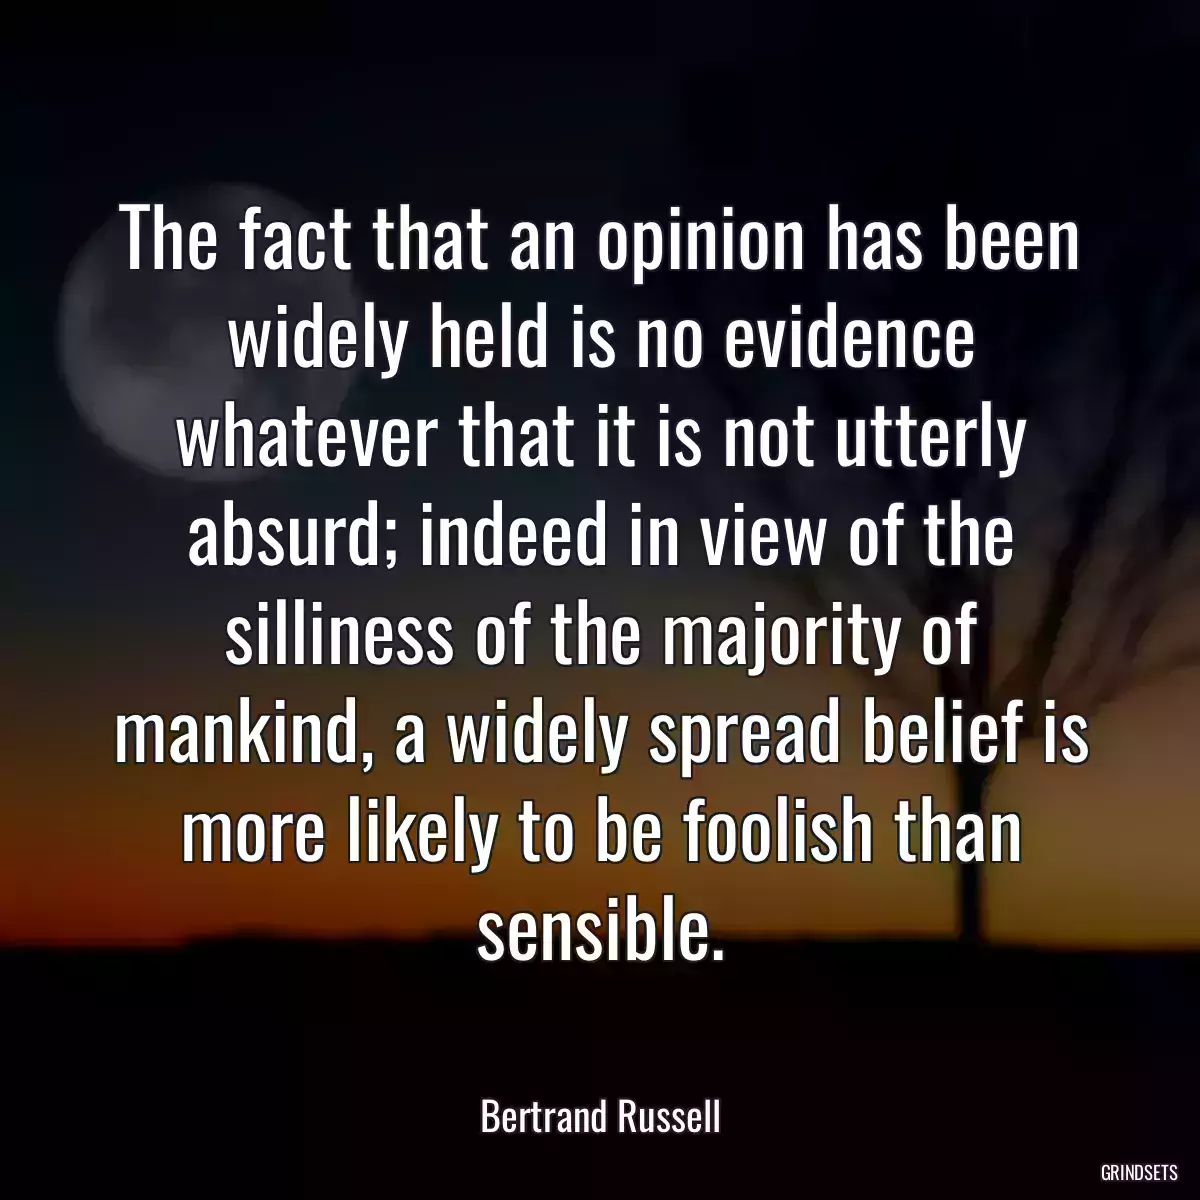 The fact that an opinion has been widely held is no evidence whatever that it is not utterly absurd; indeed in view of the silliness of the majority of mankind, a widely spread belief is more likely to be foolish than sensible.